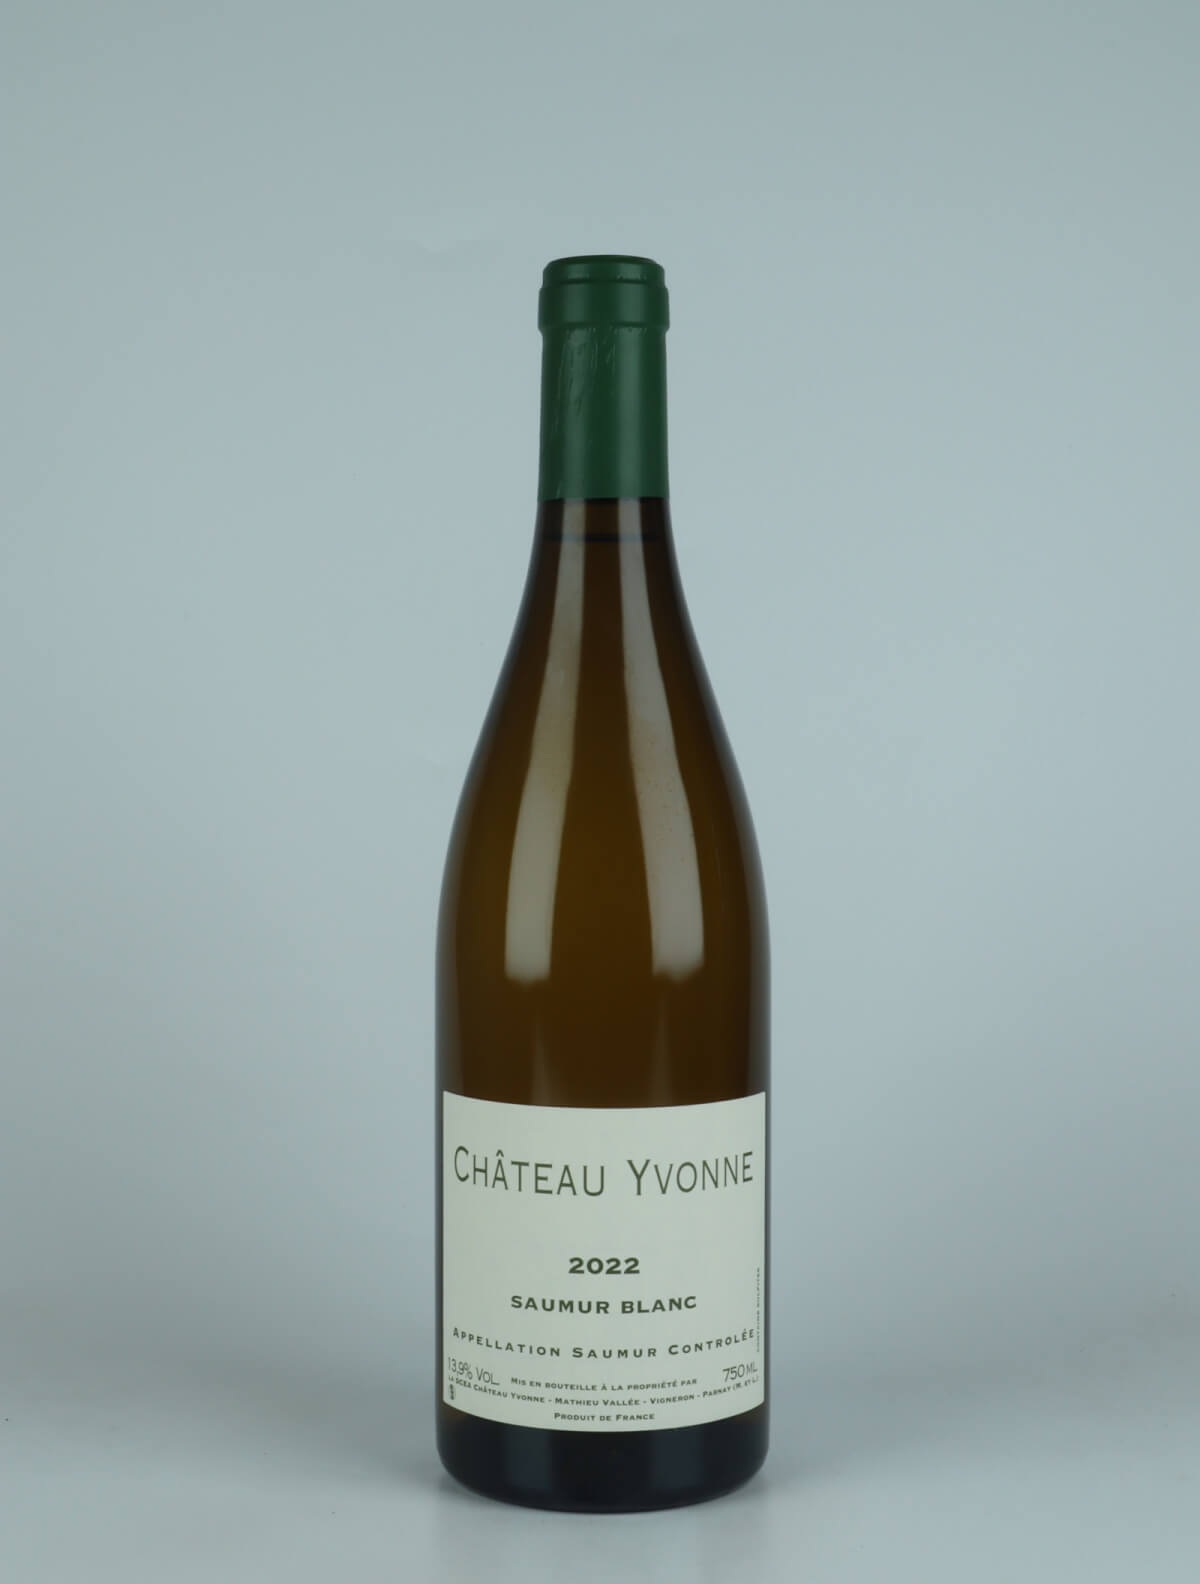 A bottle 2022 Saumur Blanc White wine from Château Yvonne, Loire in France